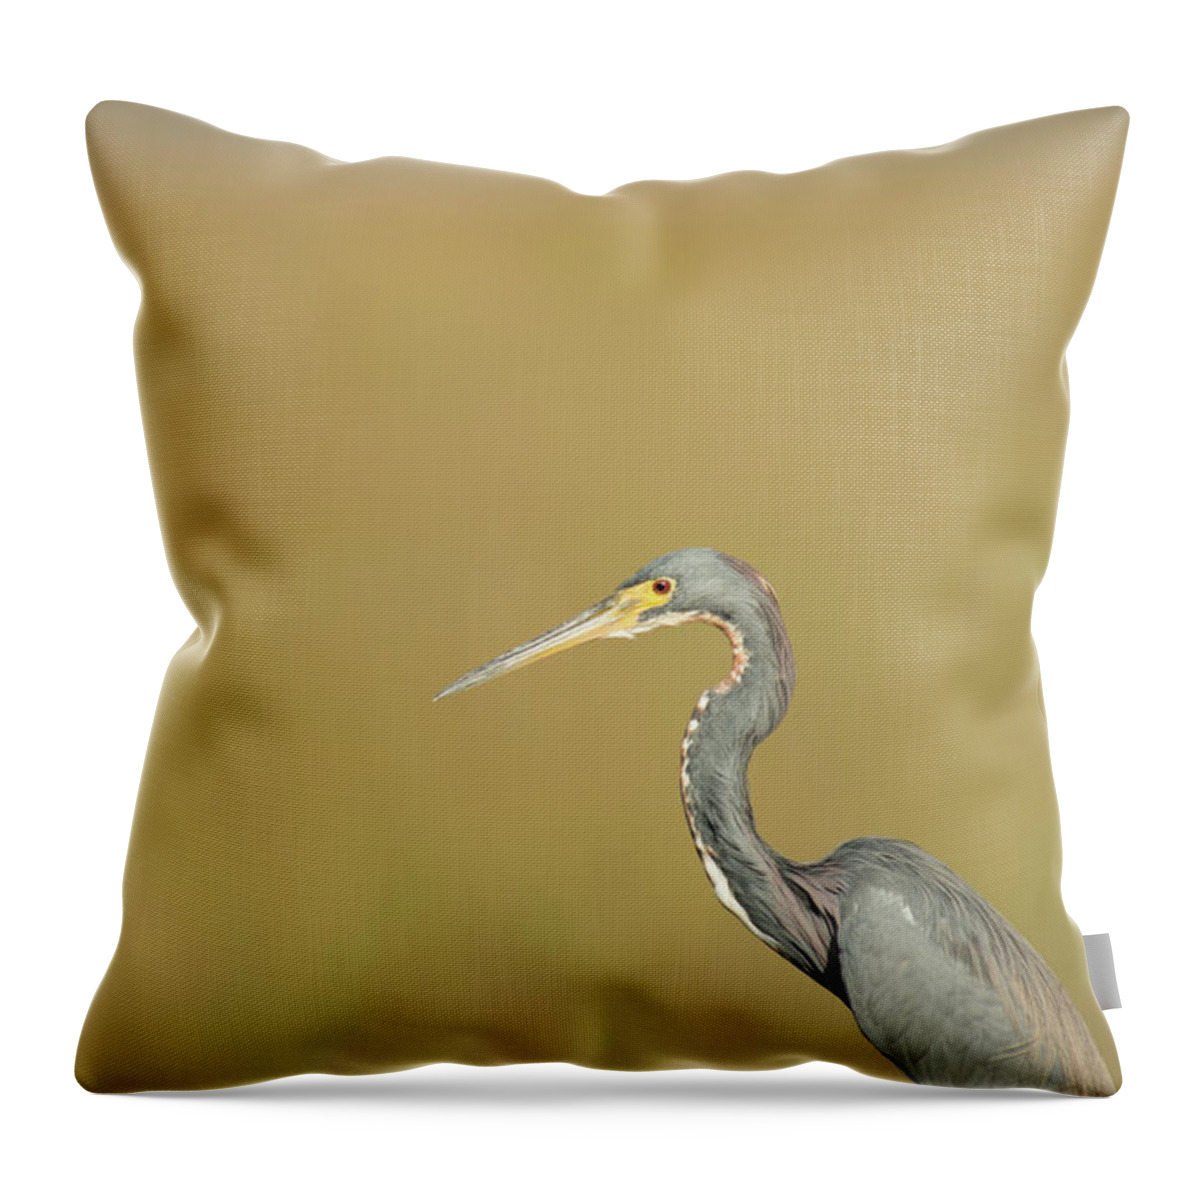 Everglades National Park Throw Pillow featuring the photograph Waiting by Frank Madia